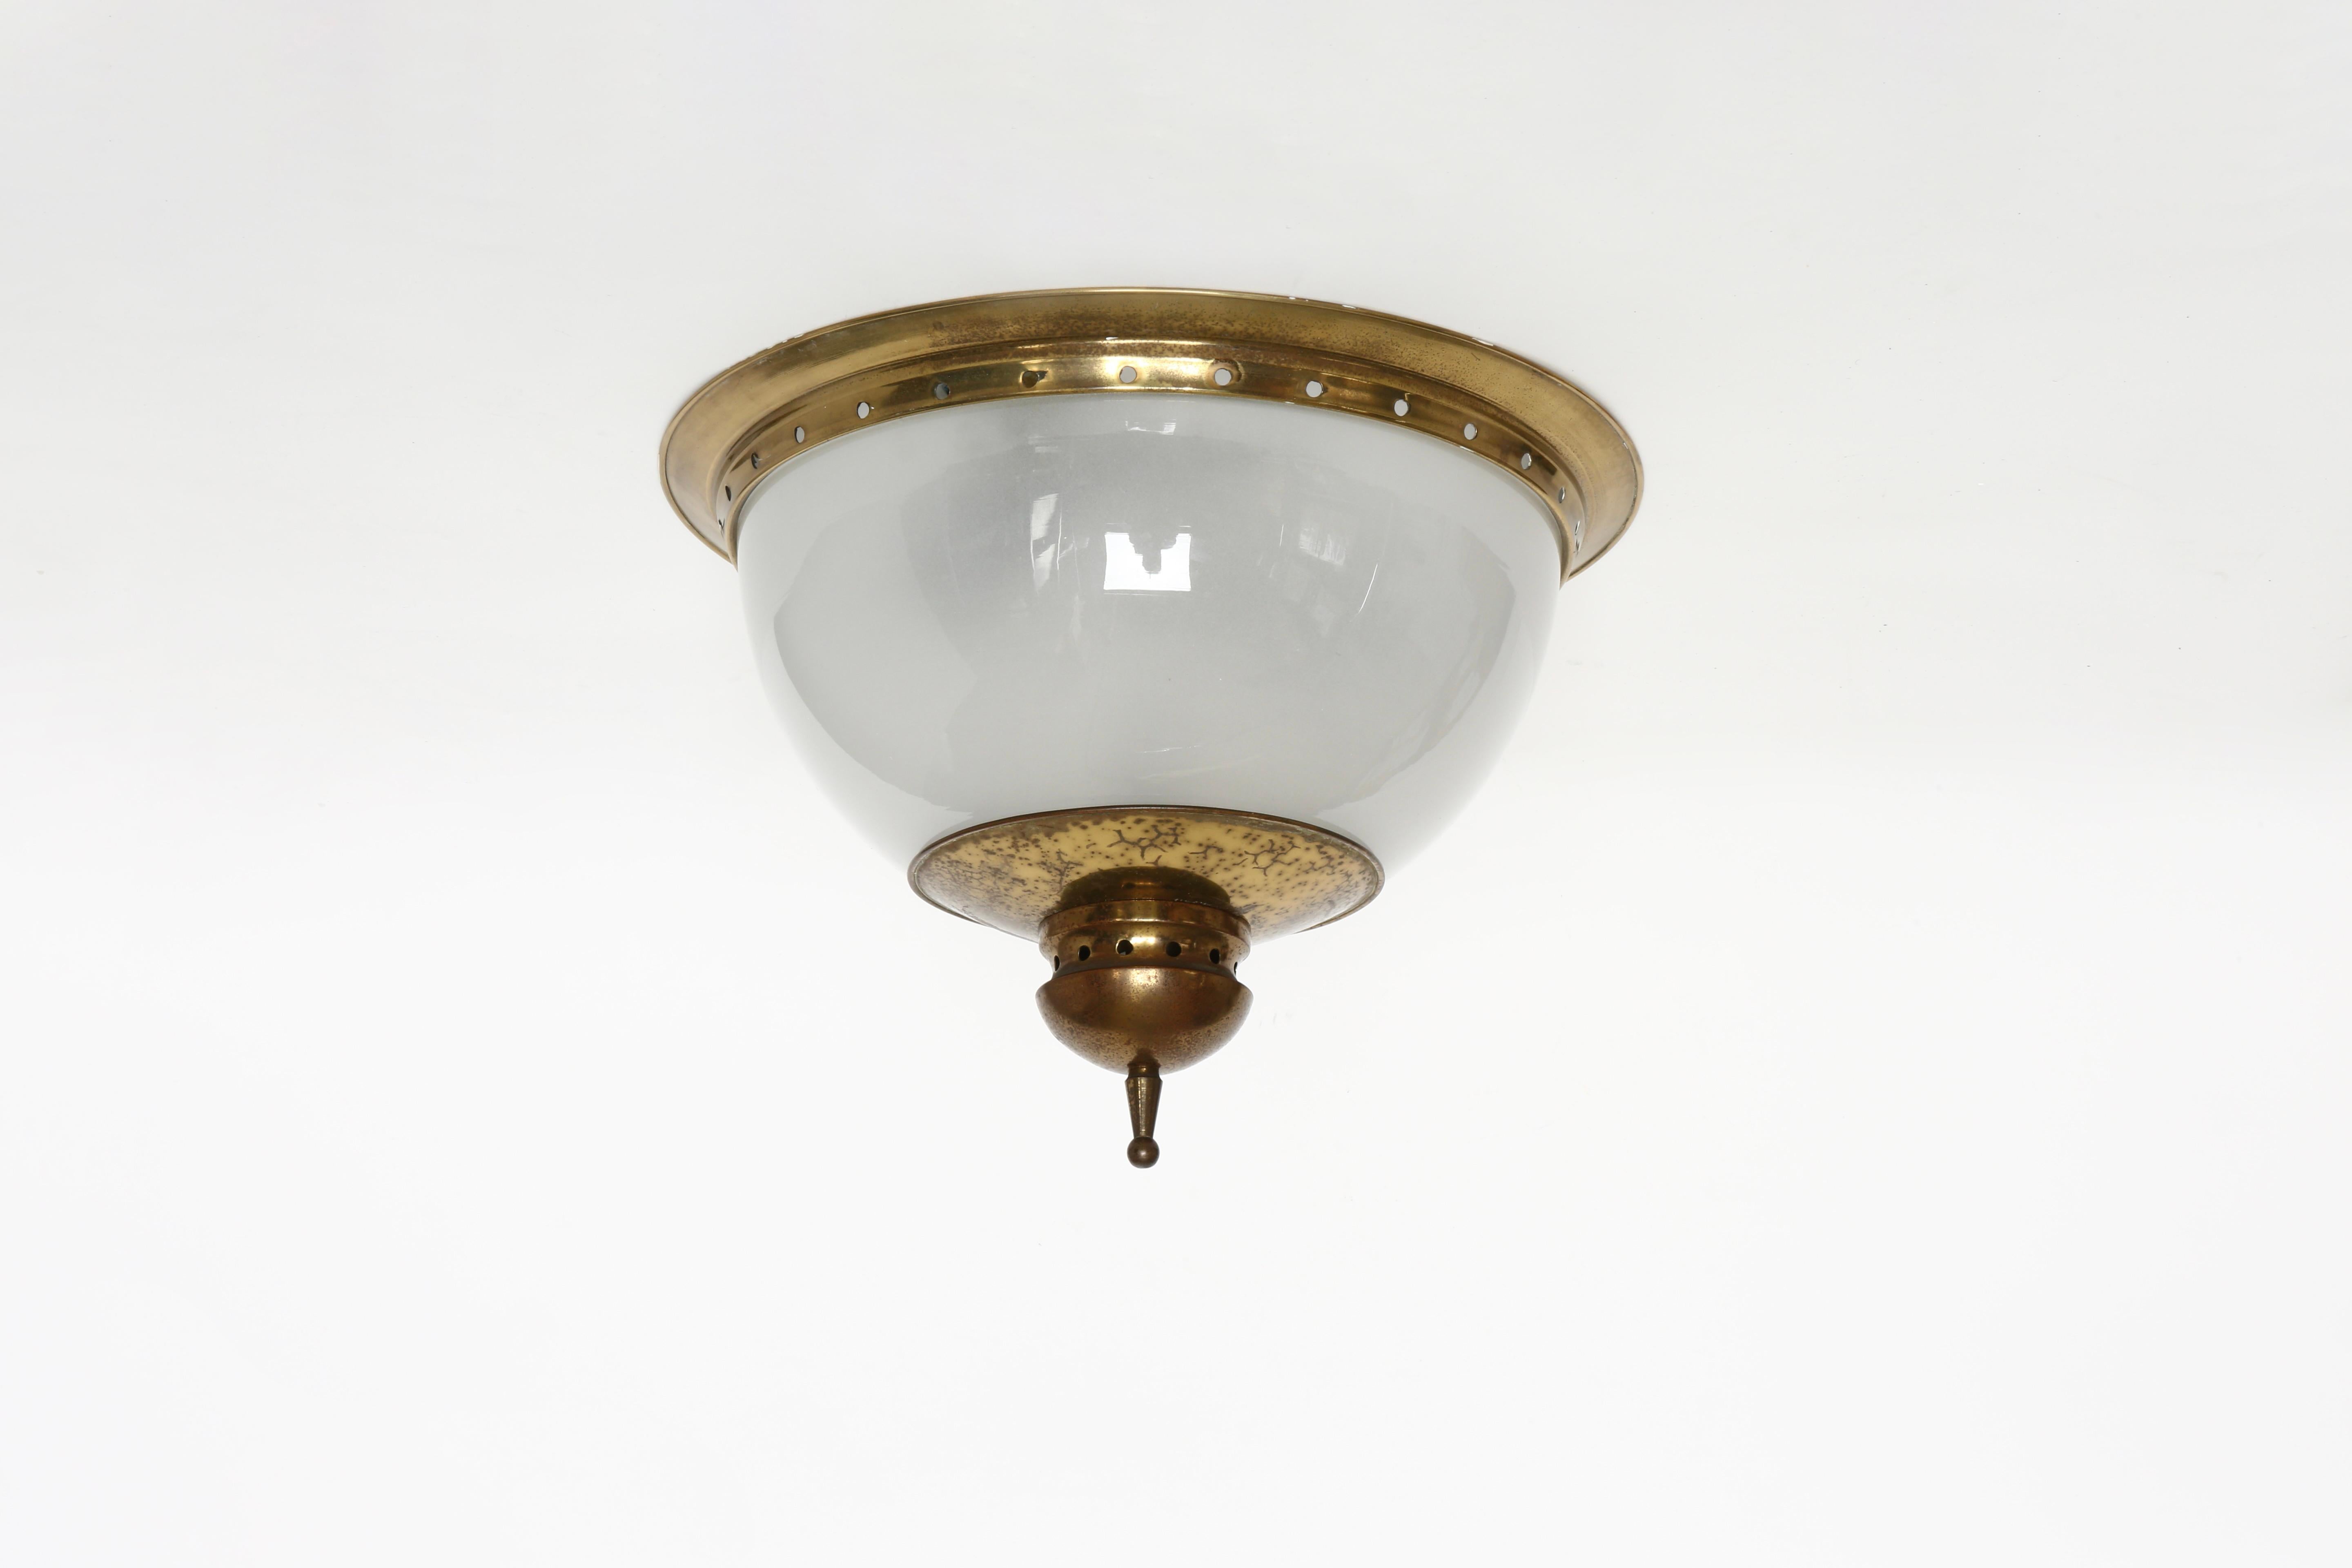 Luigi Caccia Dominioni for Azucena wall or ceiling light
Made in Italy, 1960s
Opalescent glass, brass
Takes 2 medium base bulbs
Complimentary US rewiring upon request
Price is for 1 light
2 lights are available.

We take pride in bringing vintage